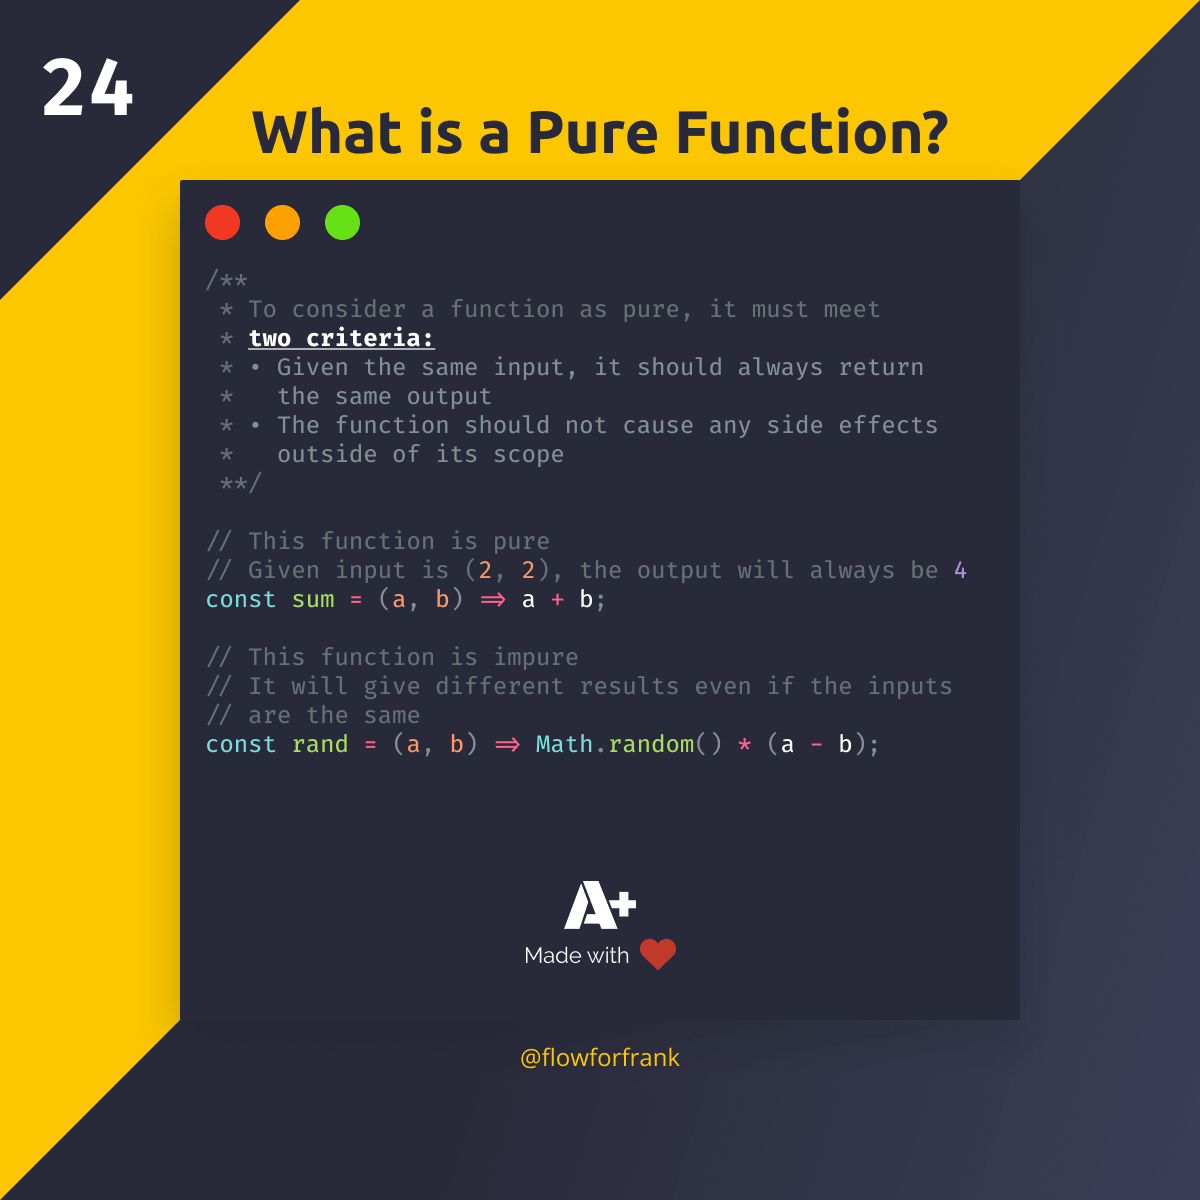 What is a Pure Function?